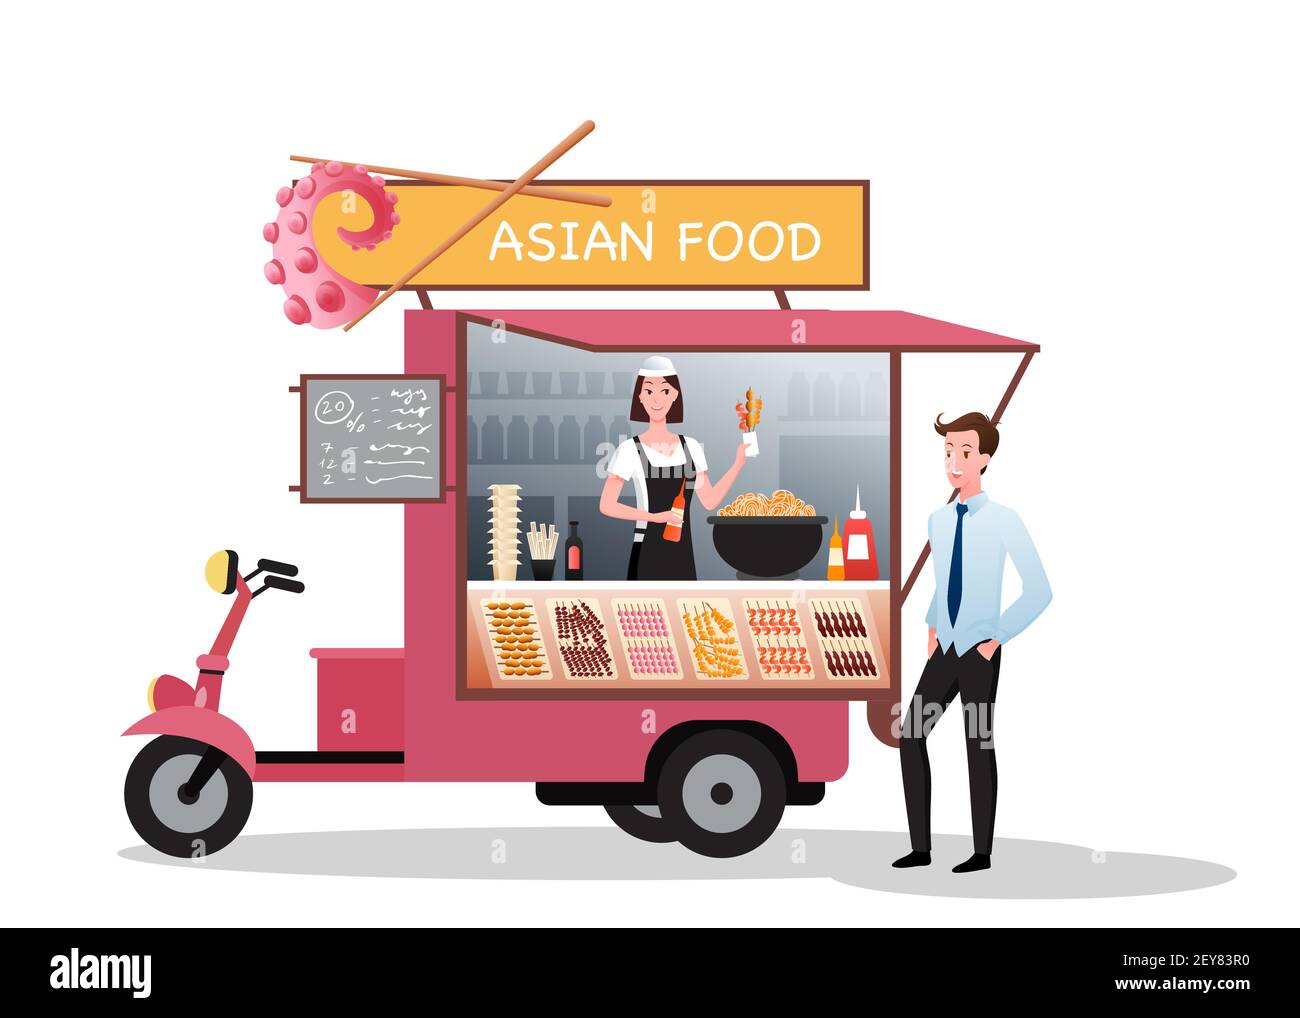 Asian street market truck with takeaway barbecue food, young man buying bbq on fair Stock Vector